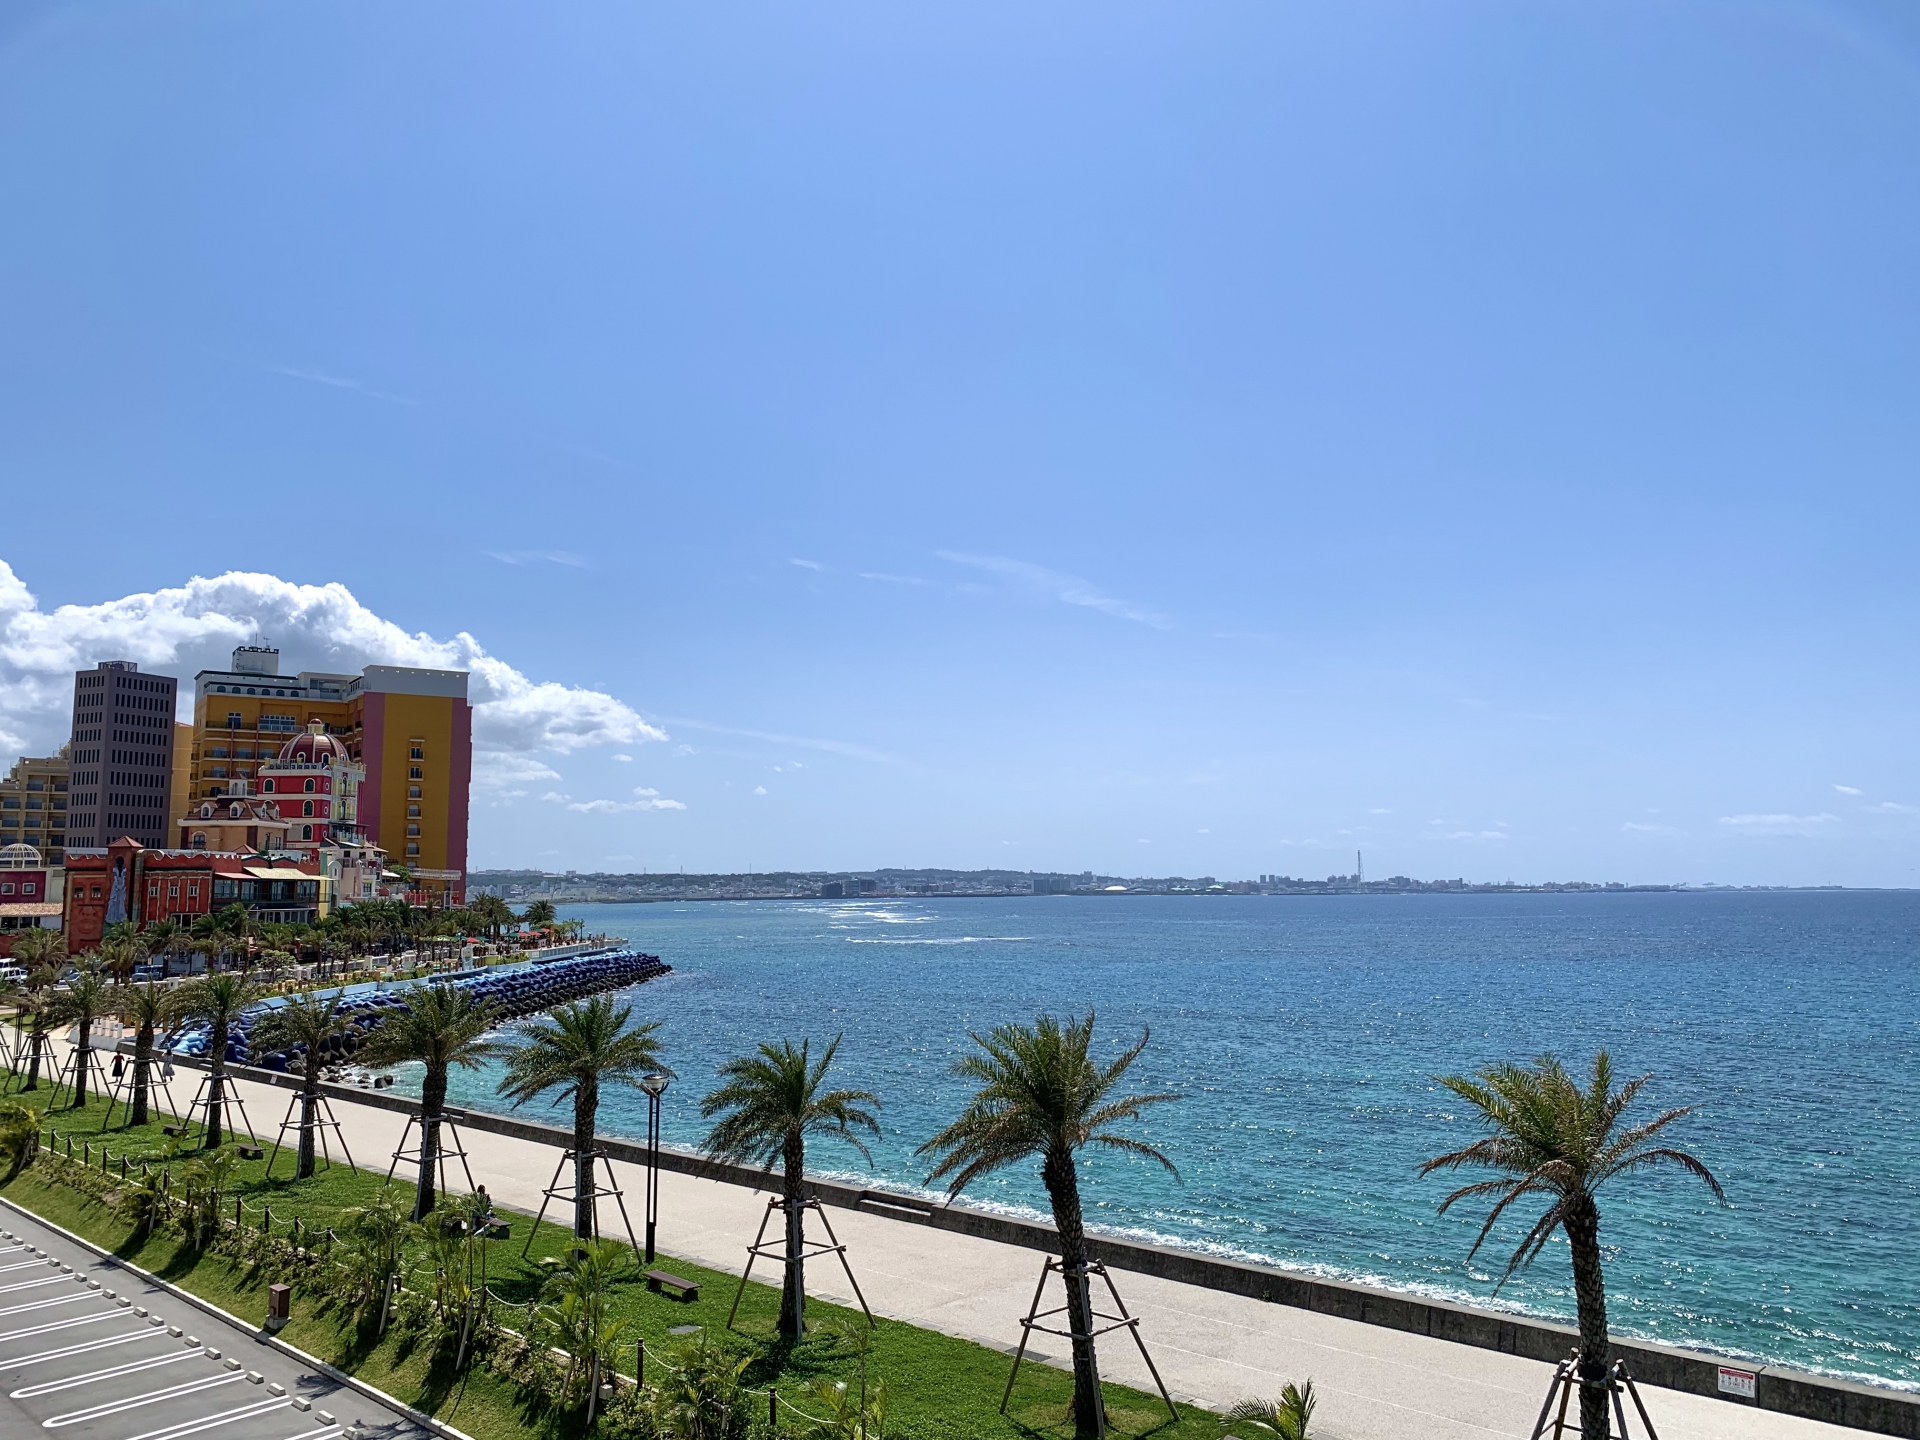 Discovering Diversity: Exploring Different City Lifestyles in Okinawa